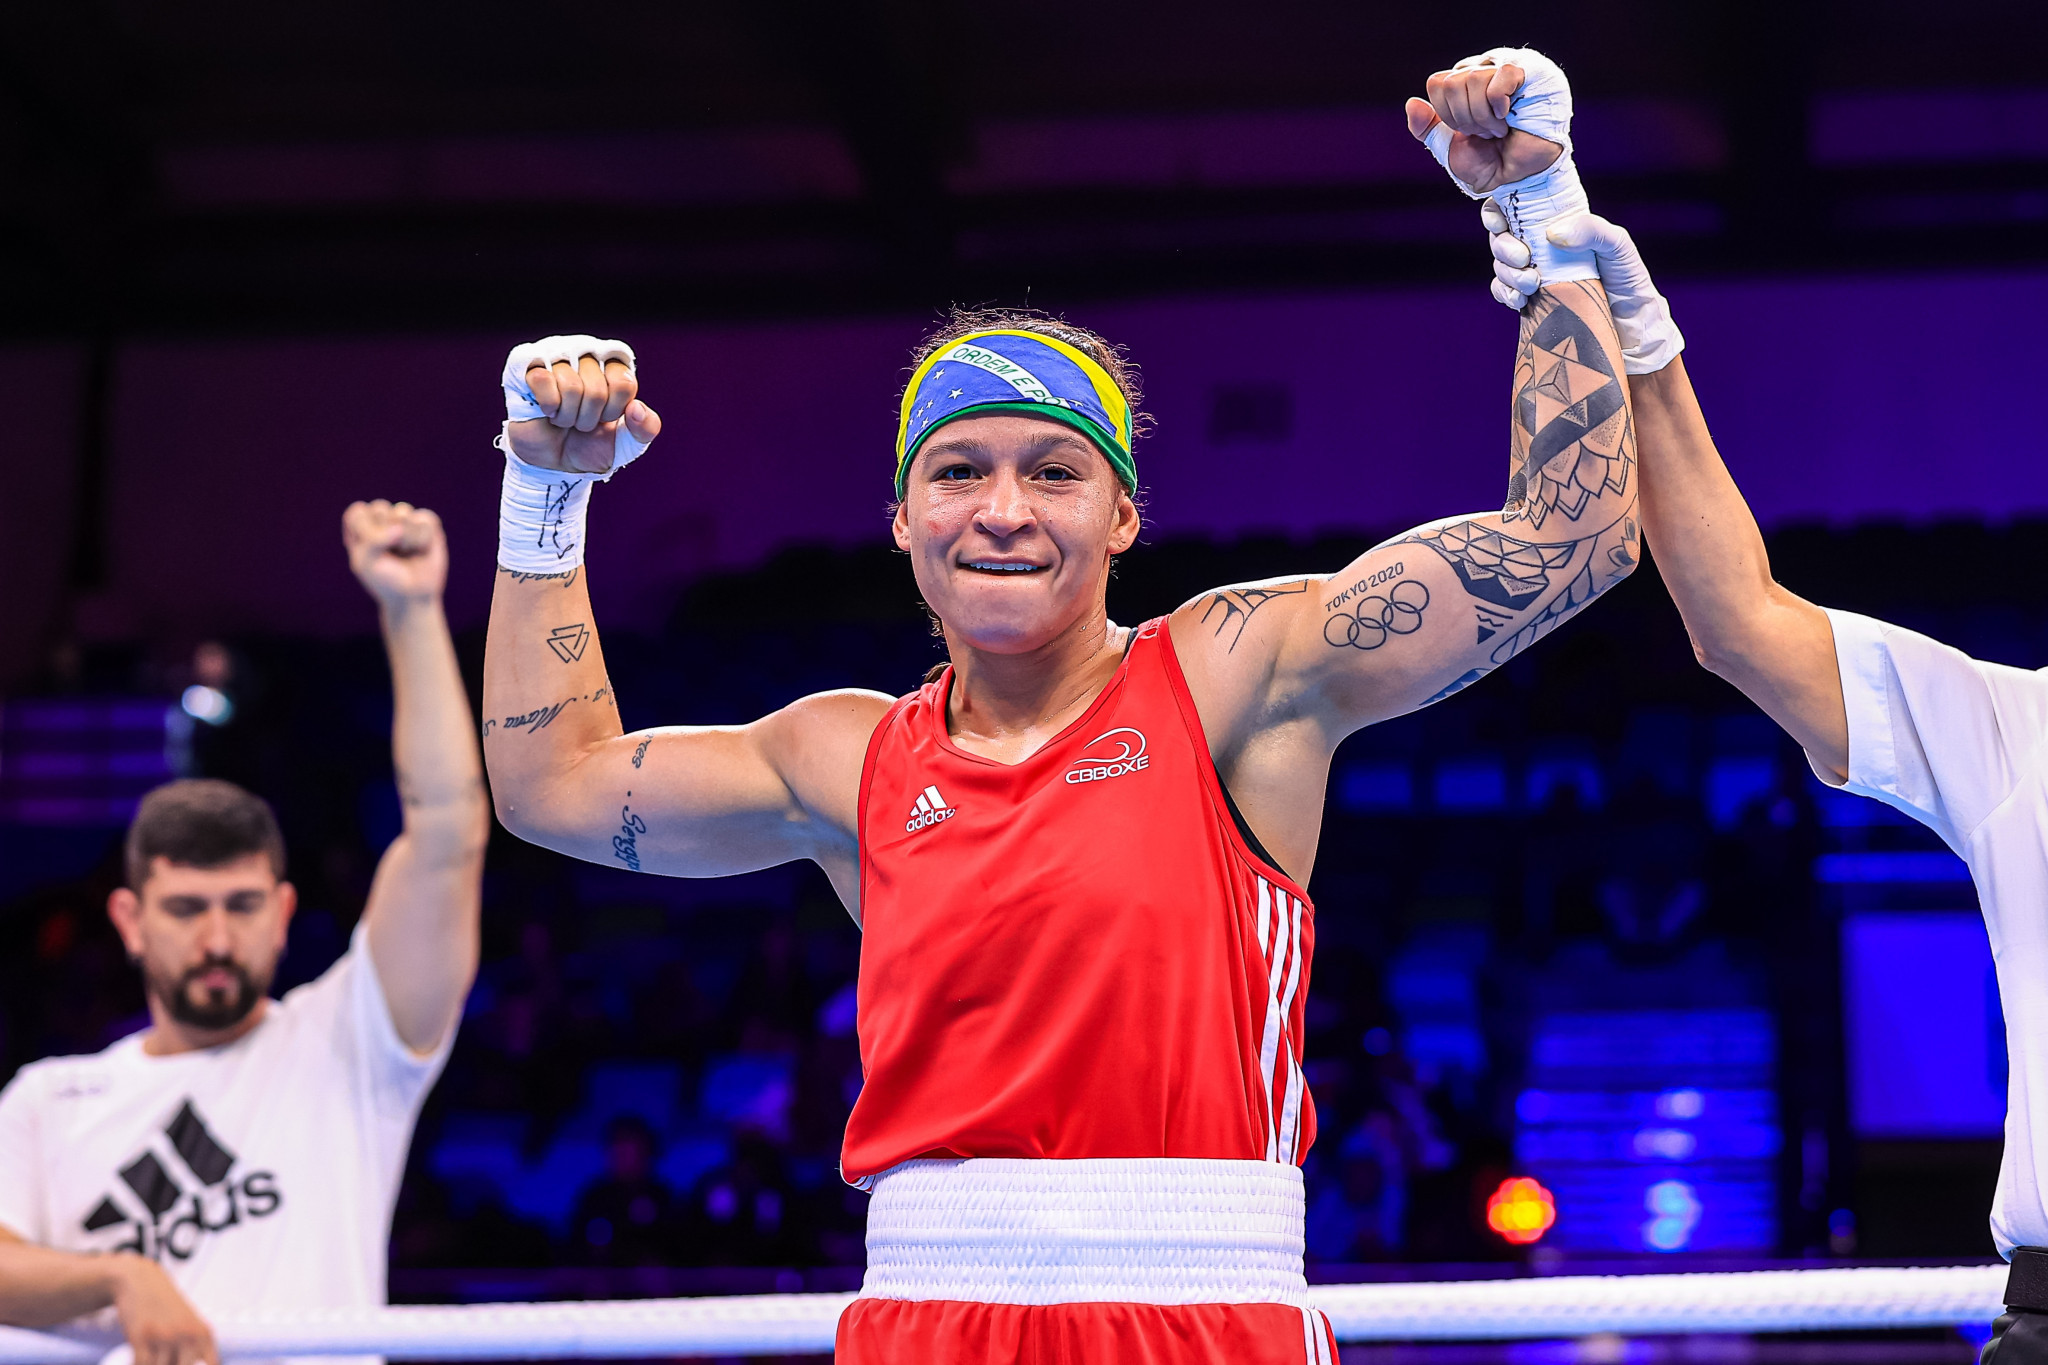 Brazil's Beatriz Ferreira, a 2019 world gold medallist, got her campaign off to a flying start with victory over Australia’s Danielle Scanlon ©IBA